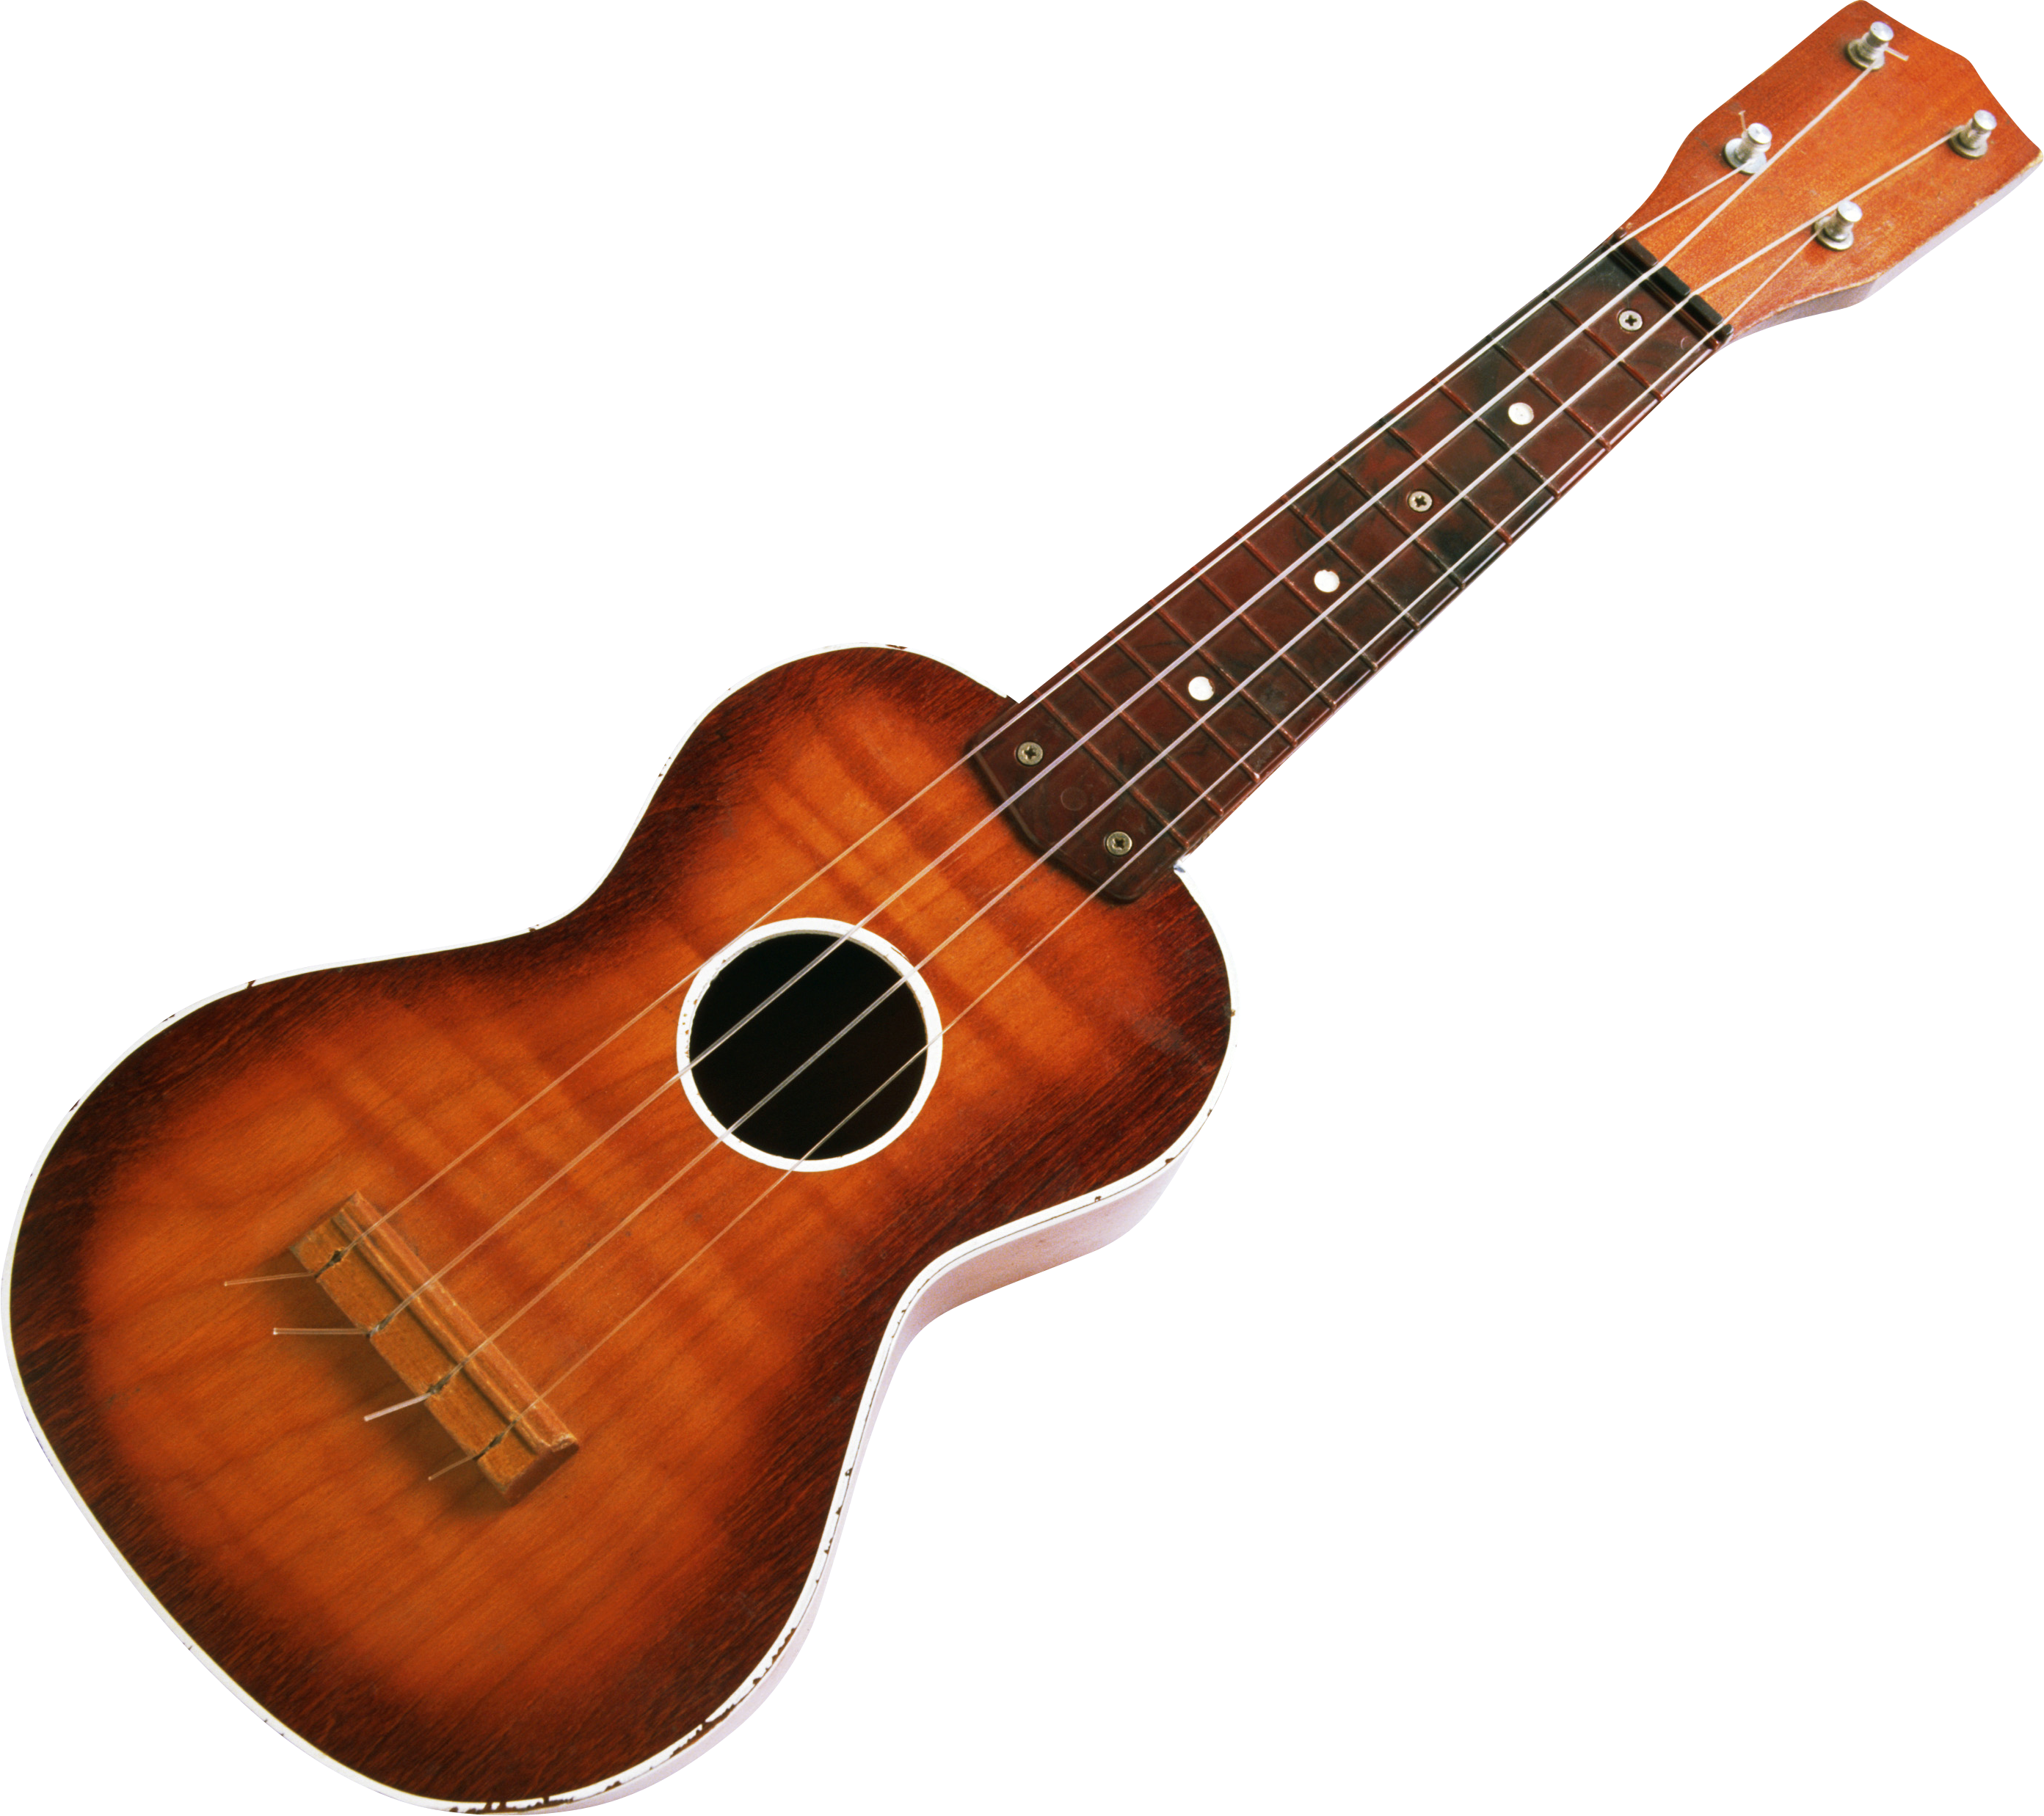 Guitar PNG images free picture download.